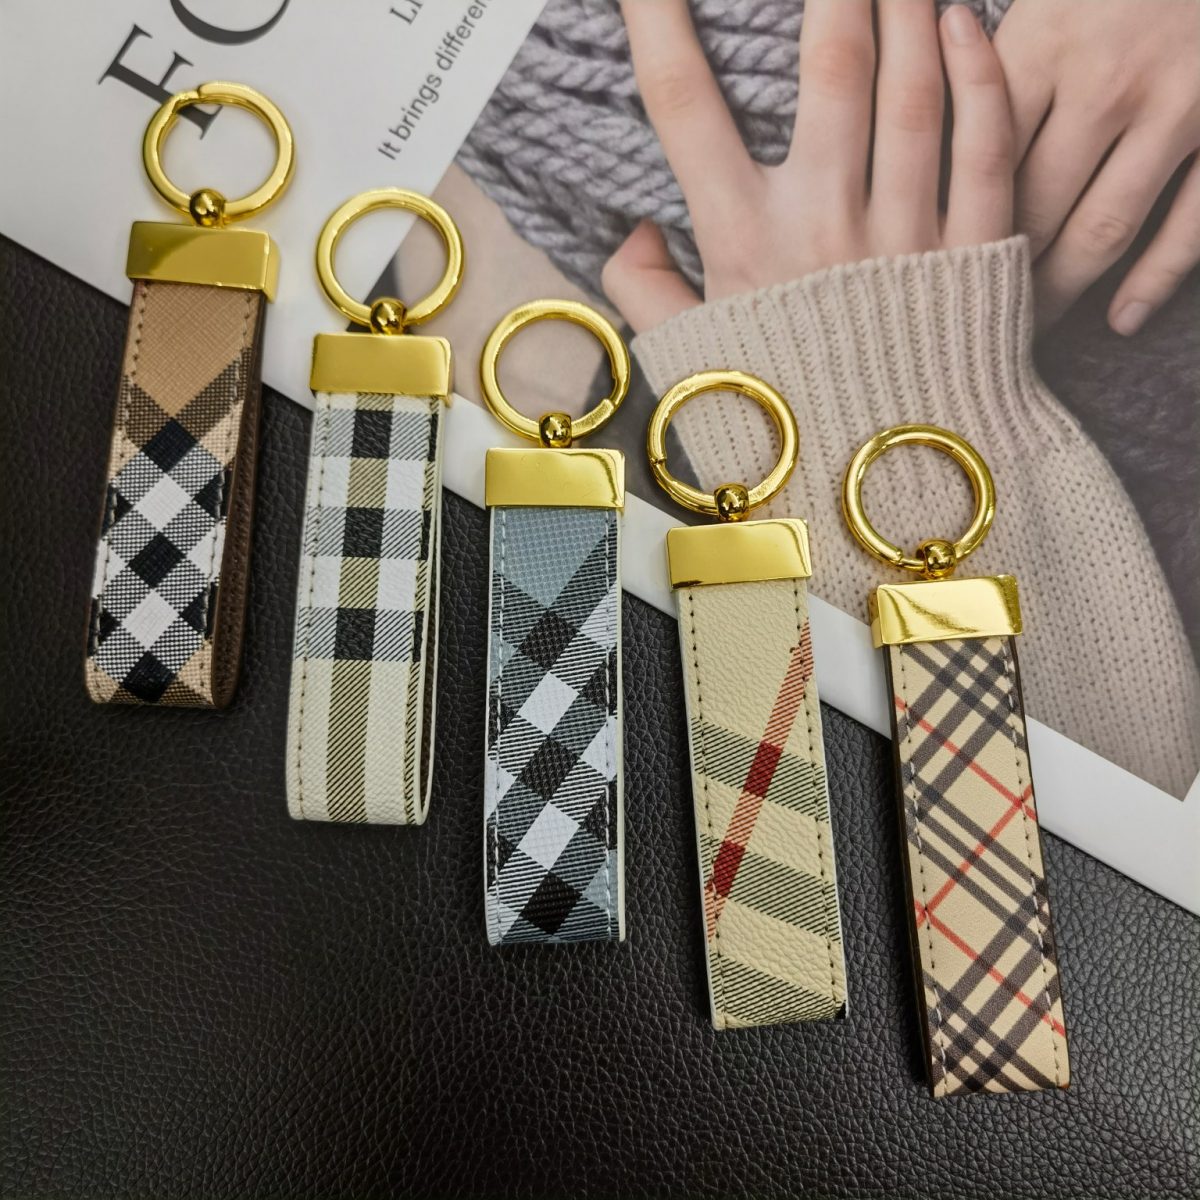 Lush Burberry keychain in vibrant